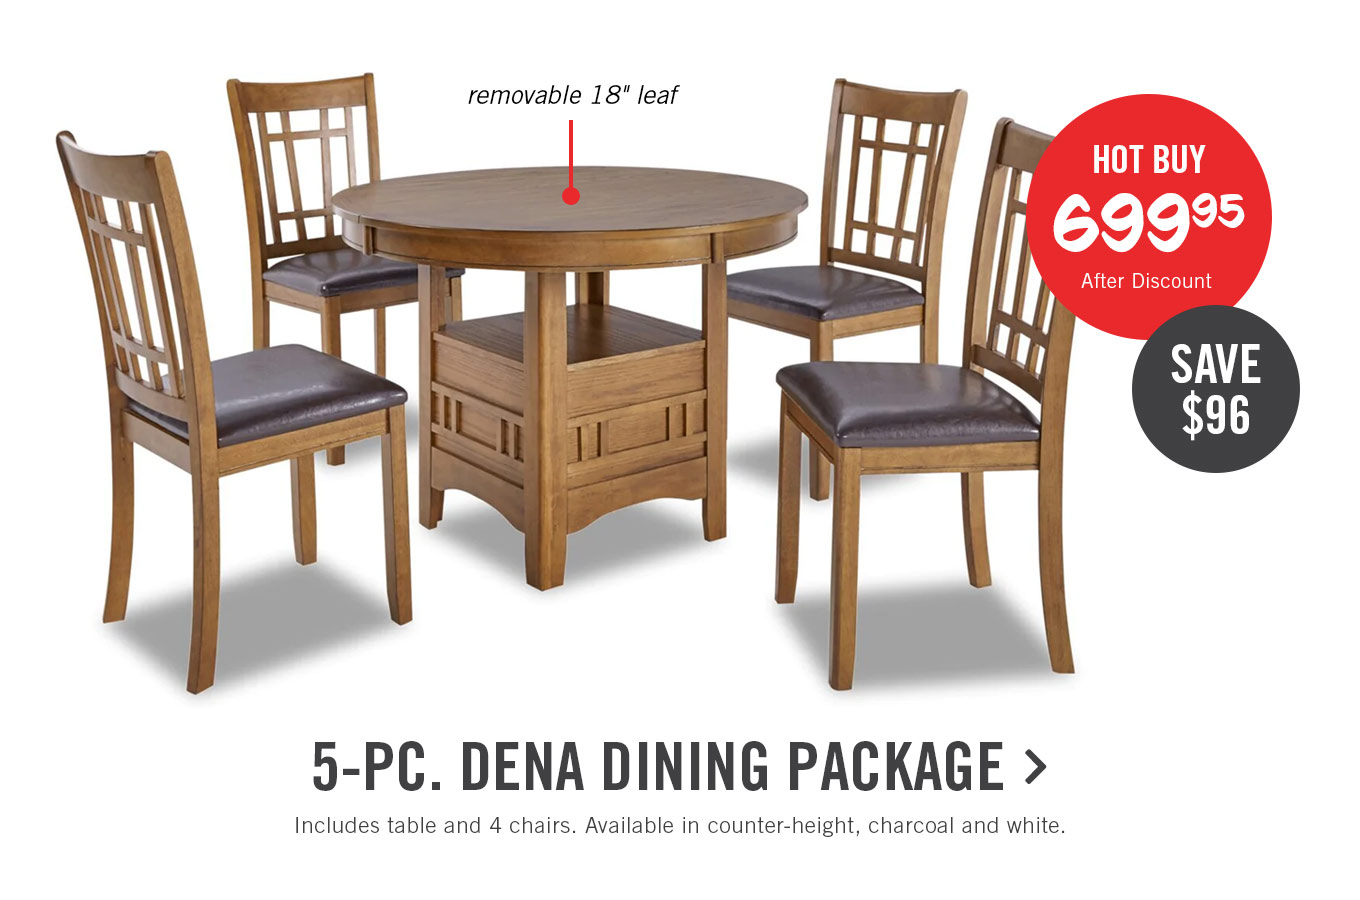 removable 18" leaf 9-PC. DENA DINING PACKAGE Includes table and 4 chairs. Available in counter-height, charcoal and white. 